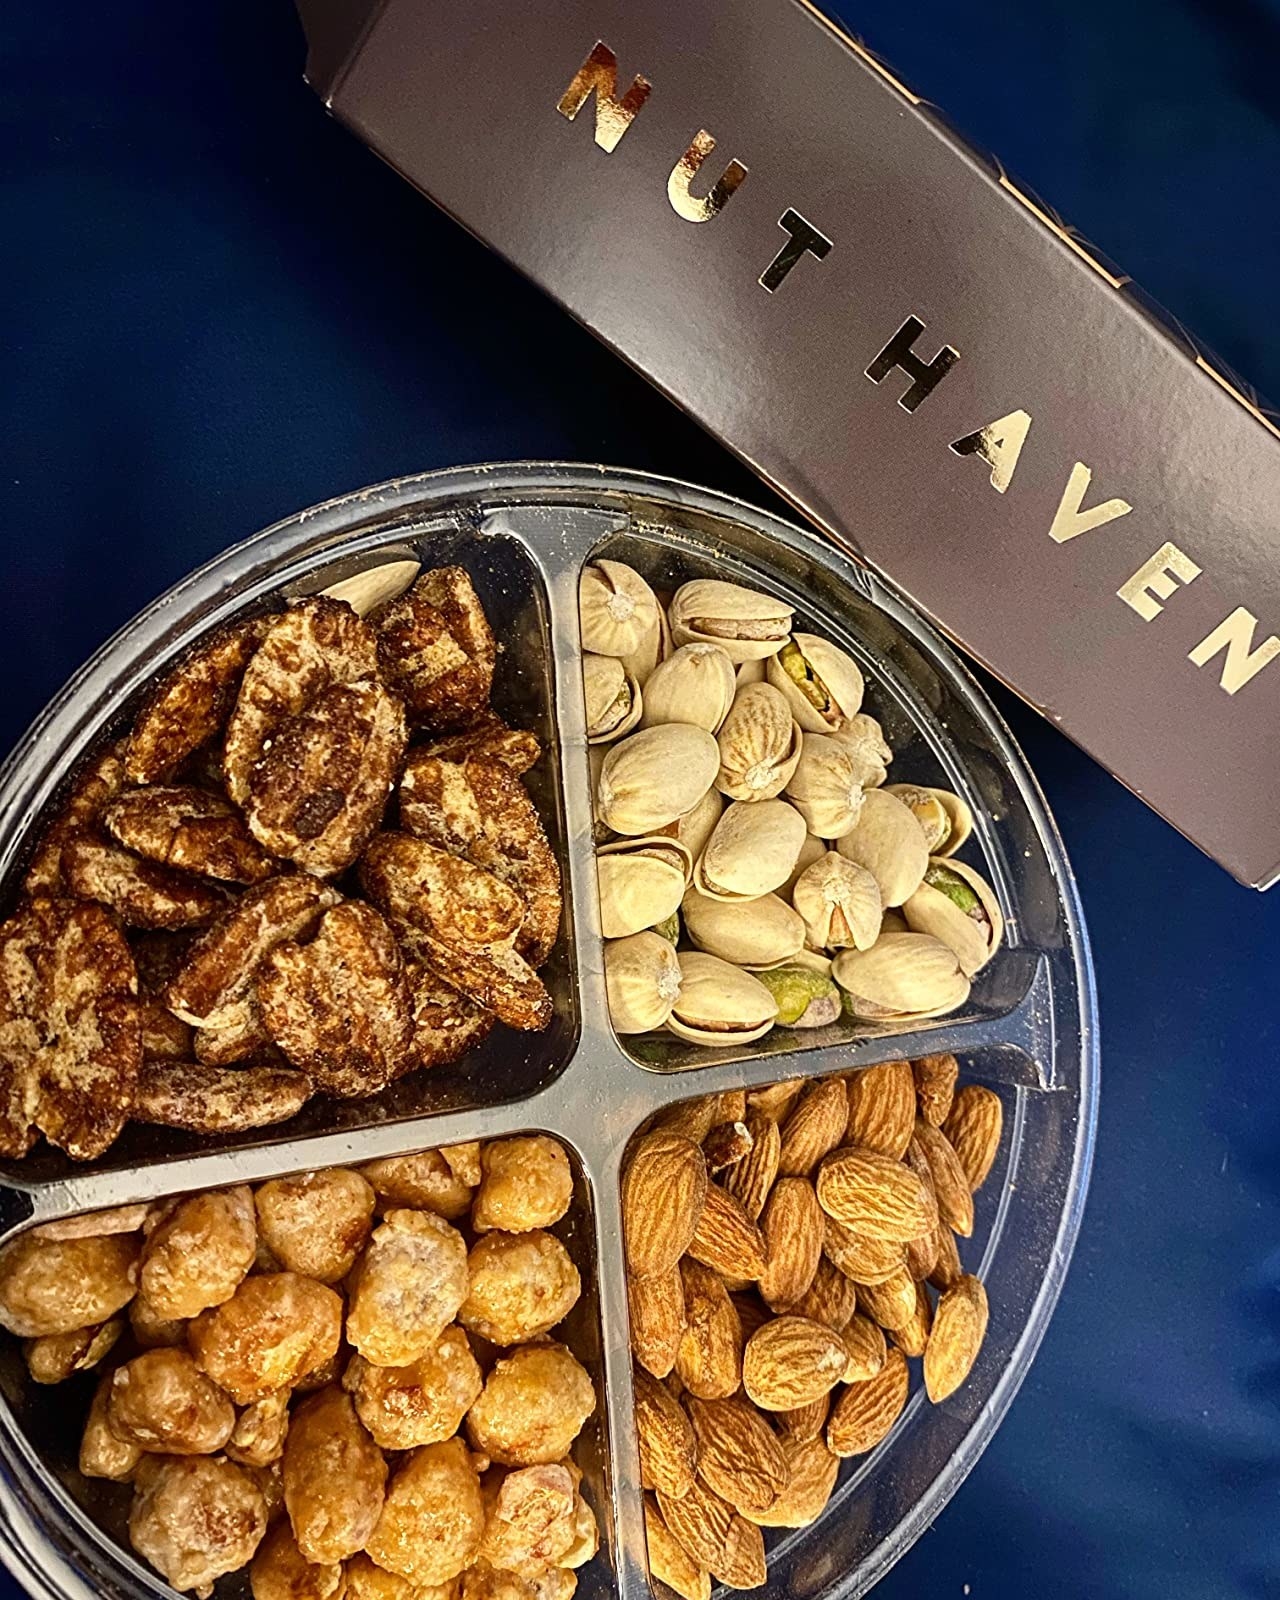 Reviewer photo of the tray of various nuts